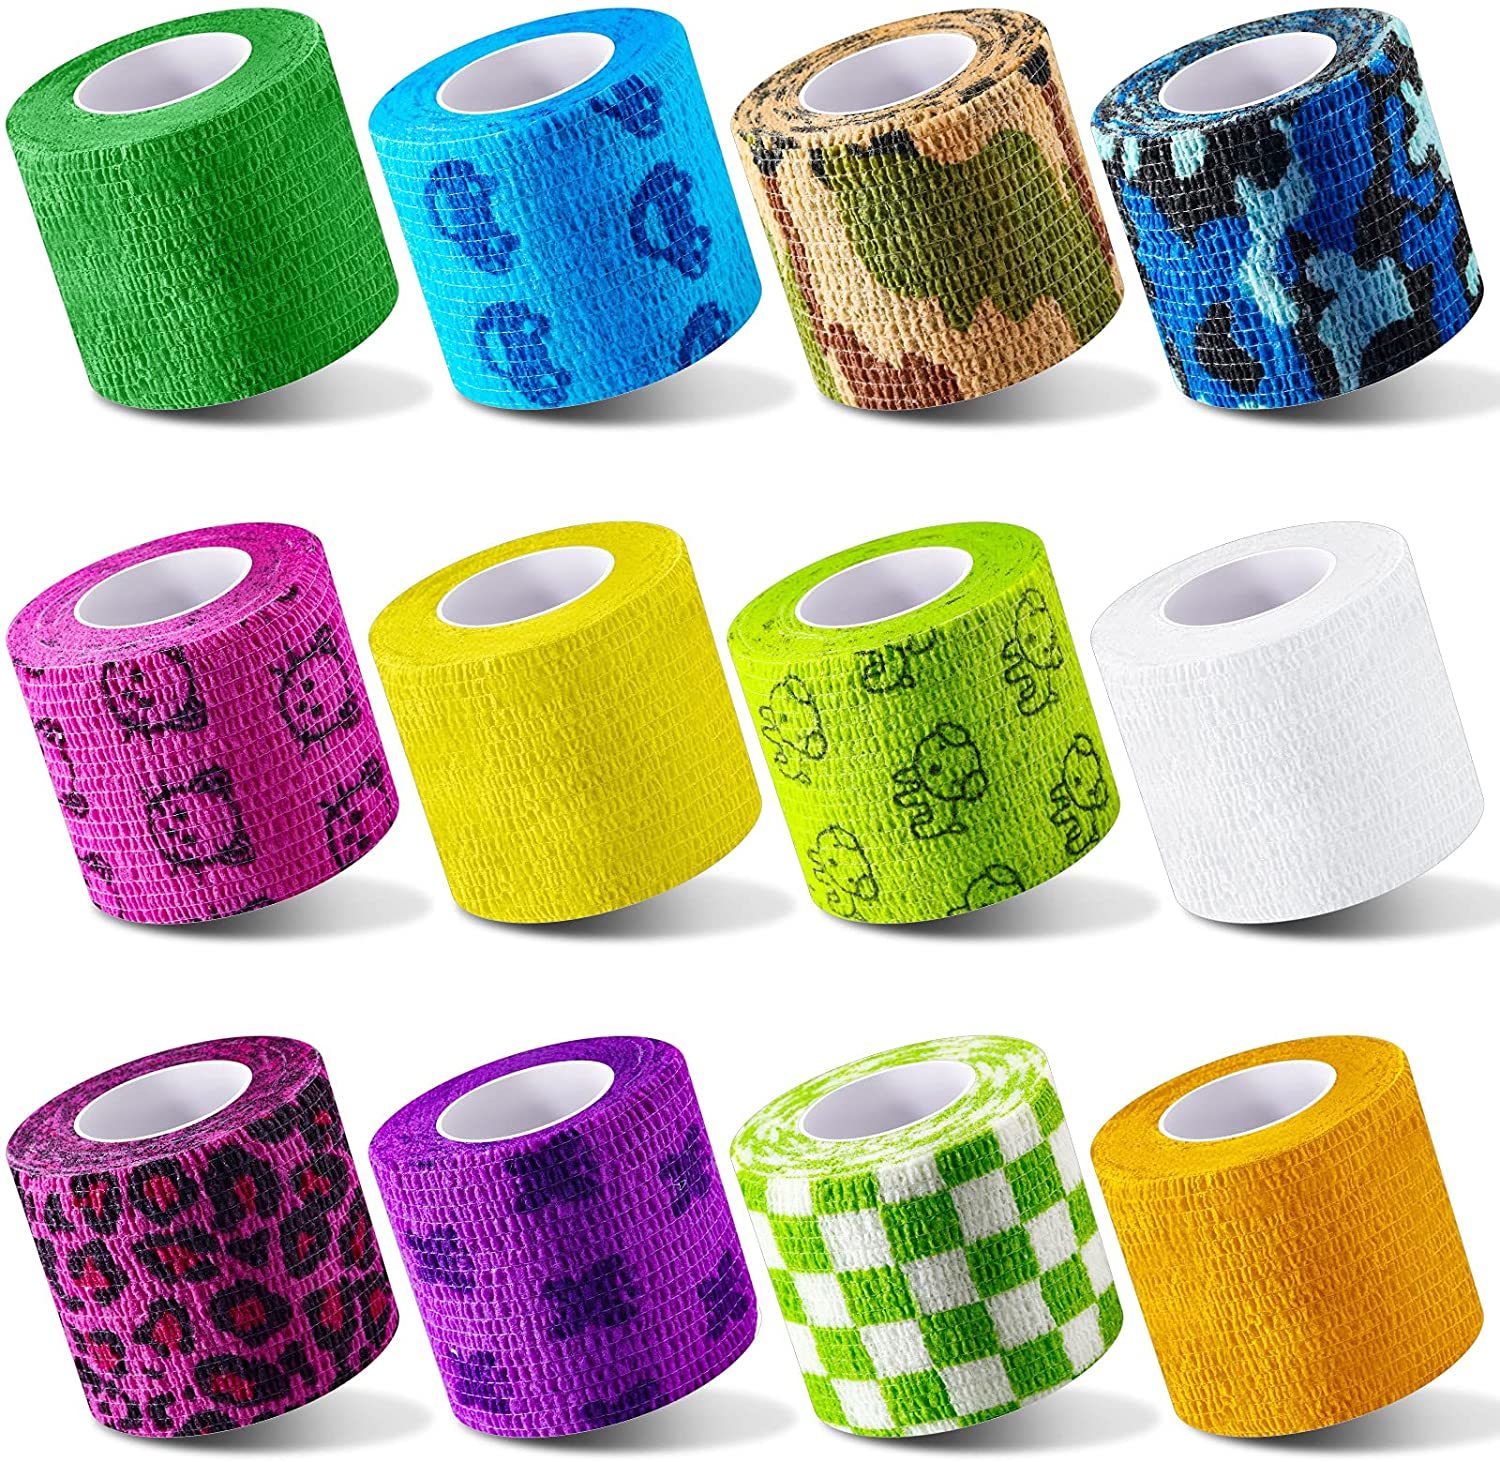  Sport tape disposable self-adhesive bandages